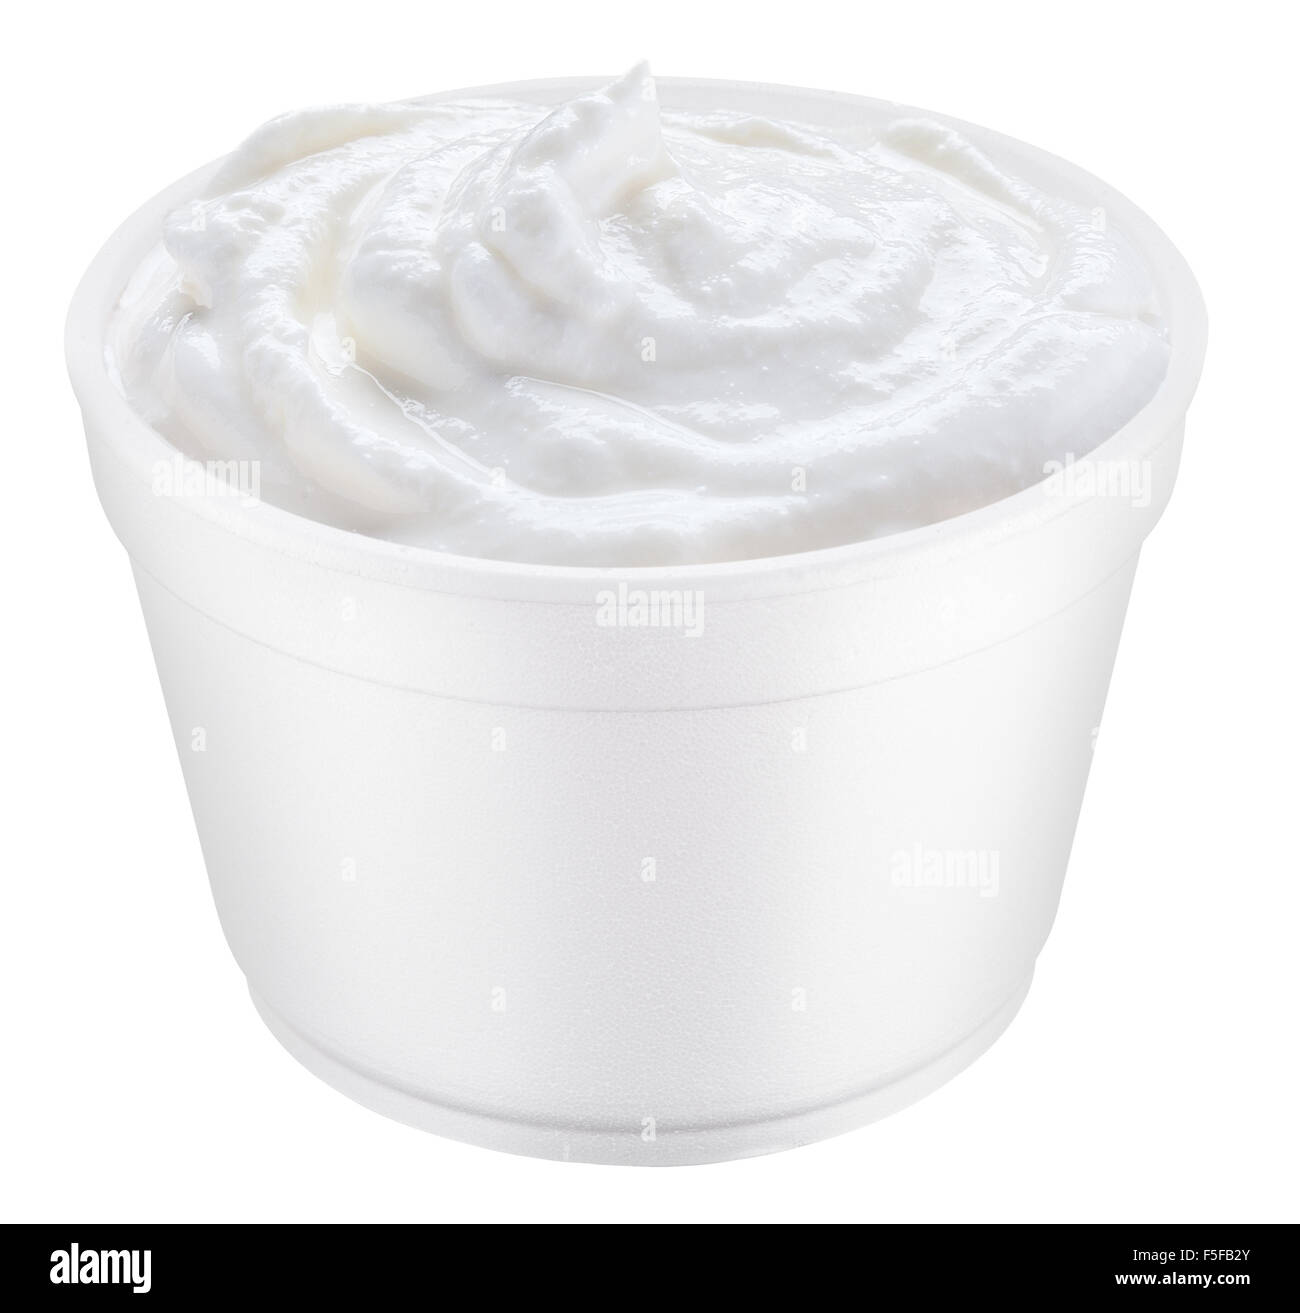 Sour cream in the polystyrene cup. File contains clipping paths. Stock Photo